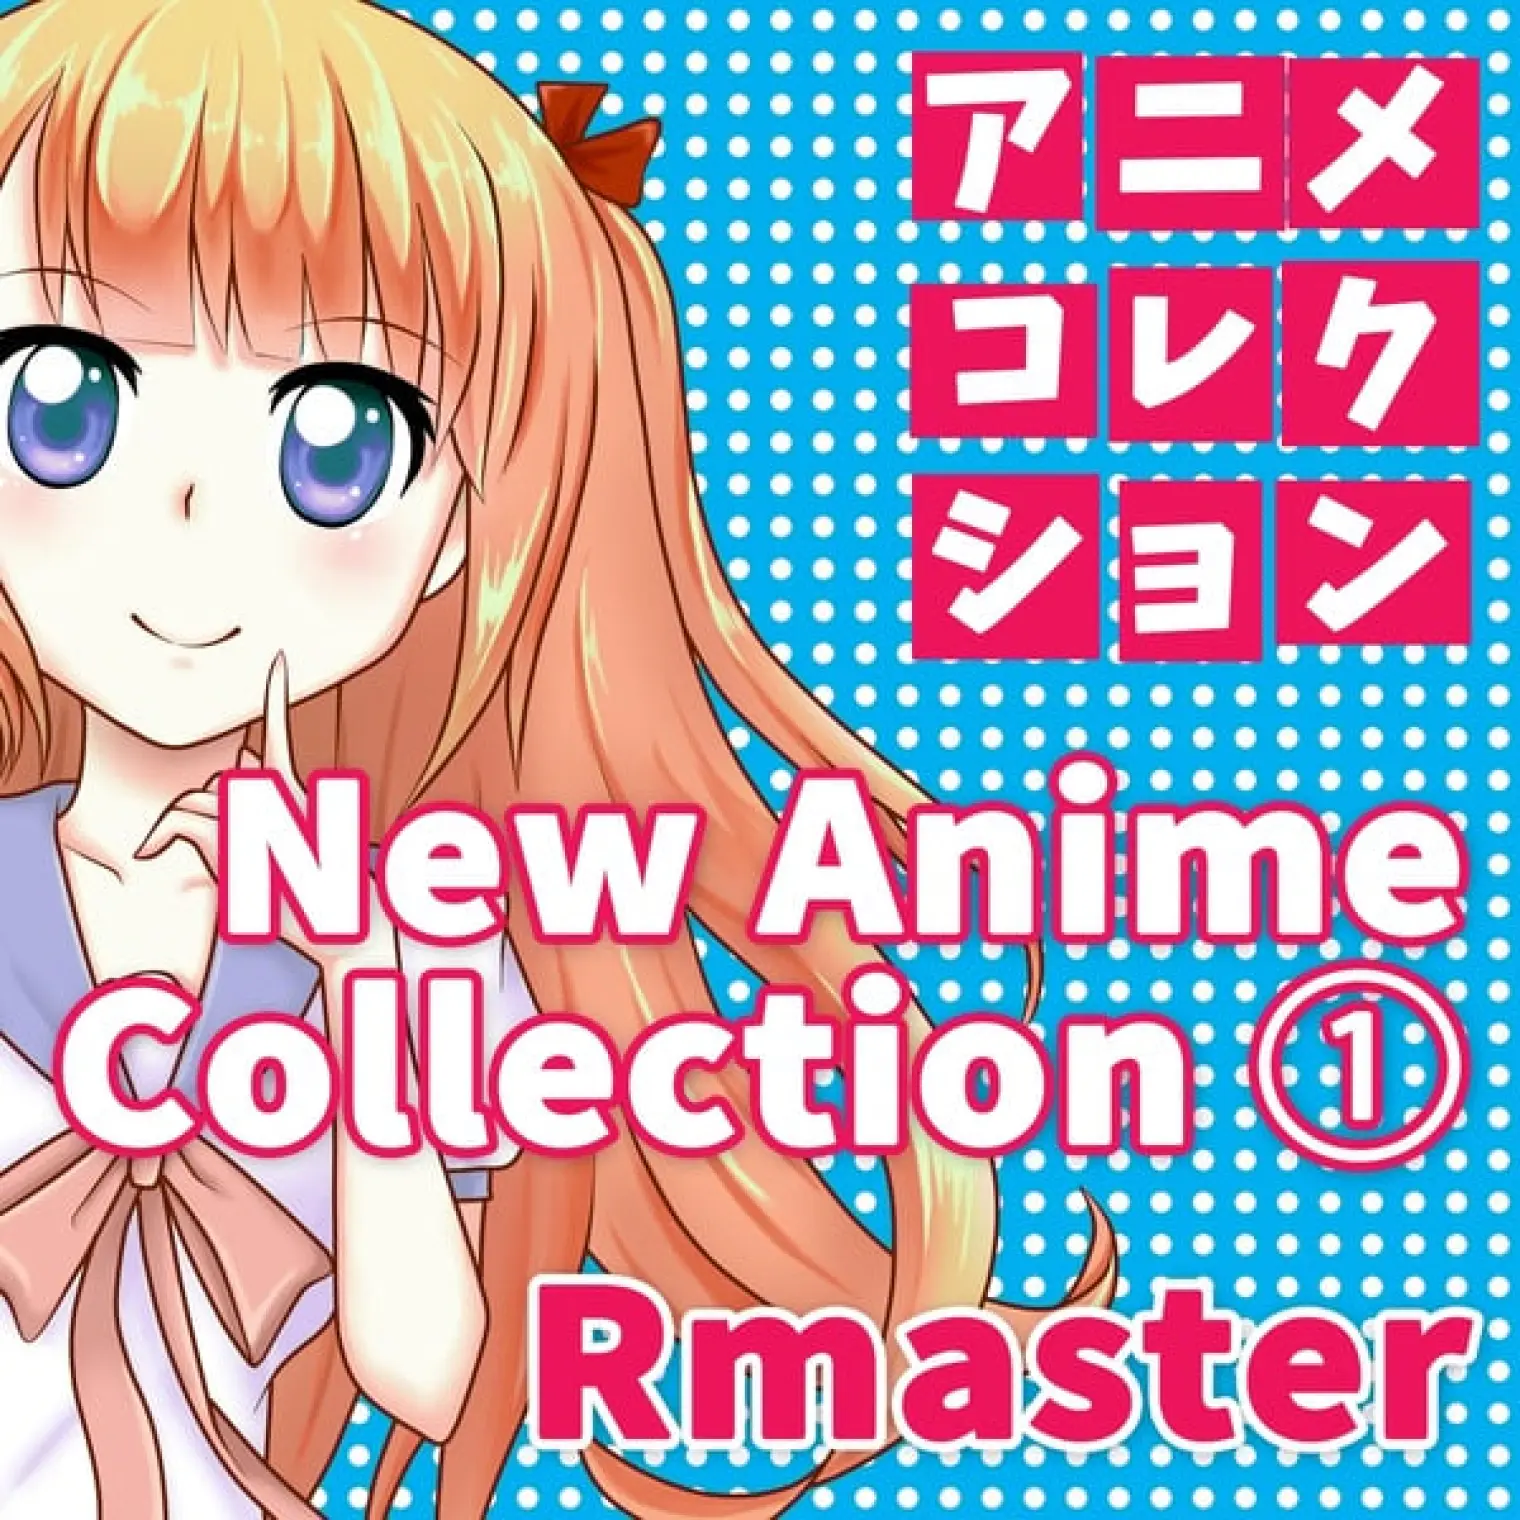 New Anime Collection, Vol.1 (Songs from "Naruto") -  RMaster 